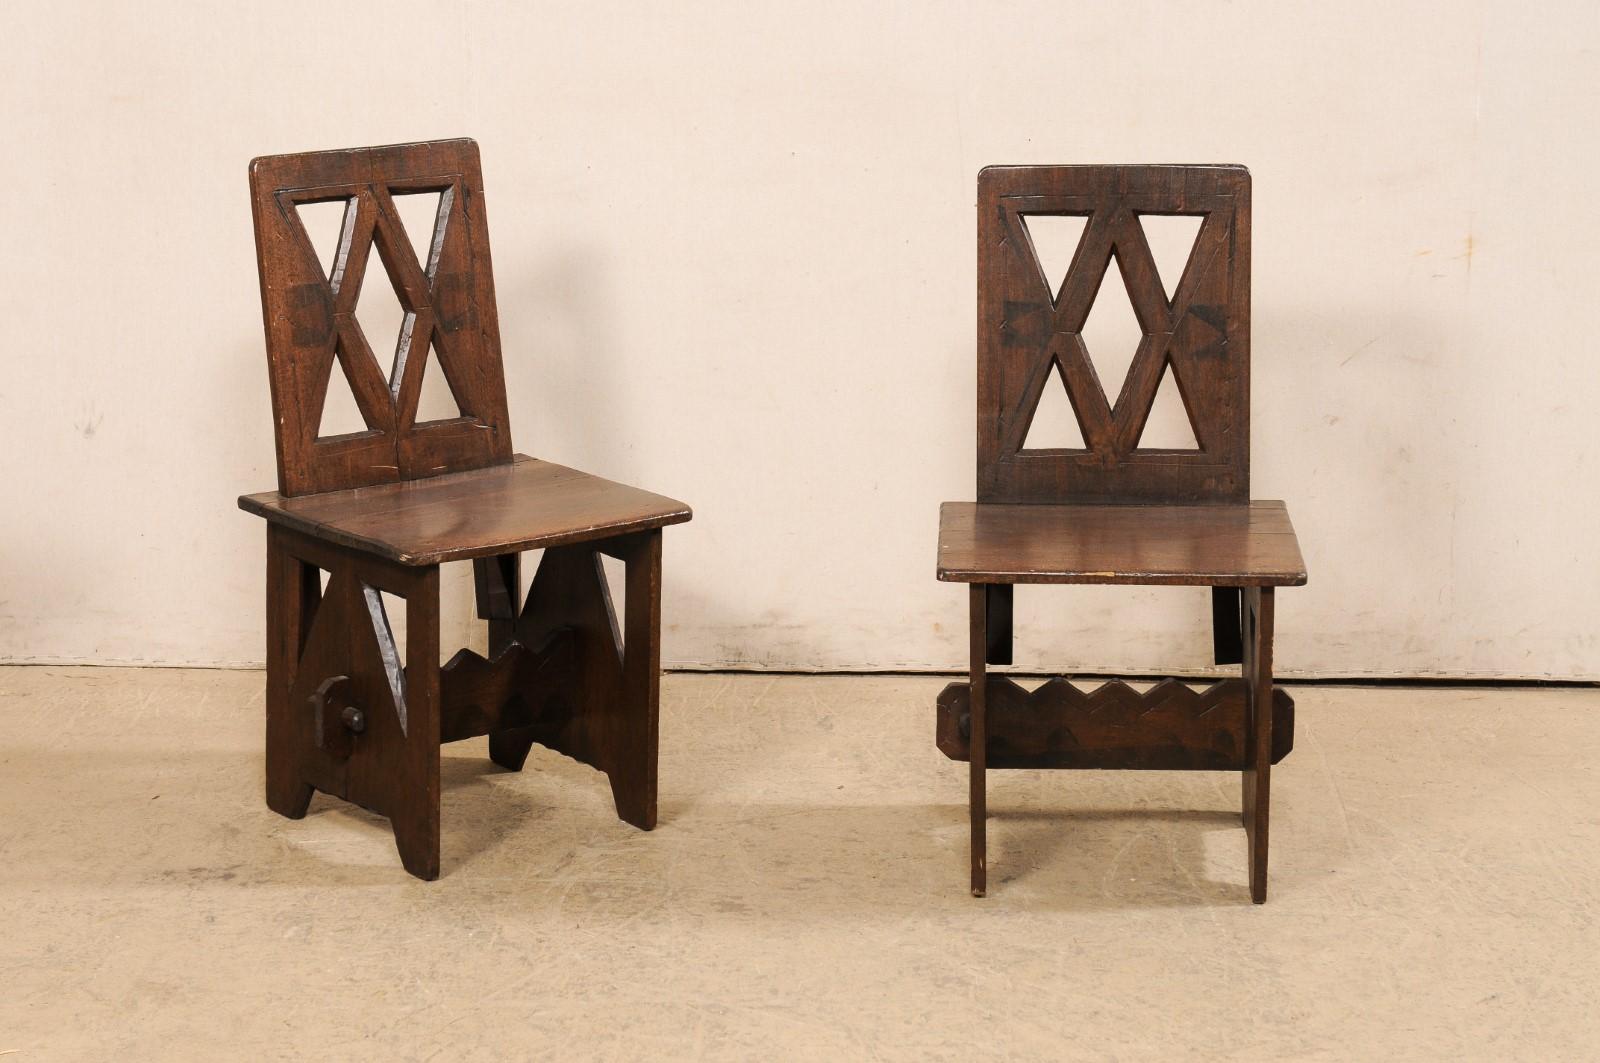 A very interesting pair of hand carved wood fireside chairs. These vintage chairs have African style carvings, and though we are unsure of their exact origin, we suspect they are N. African. The chair back rests are pierce-carved, each with a center